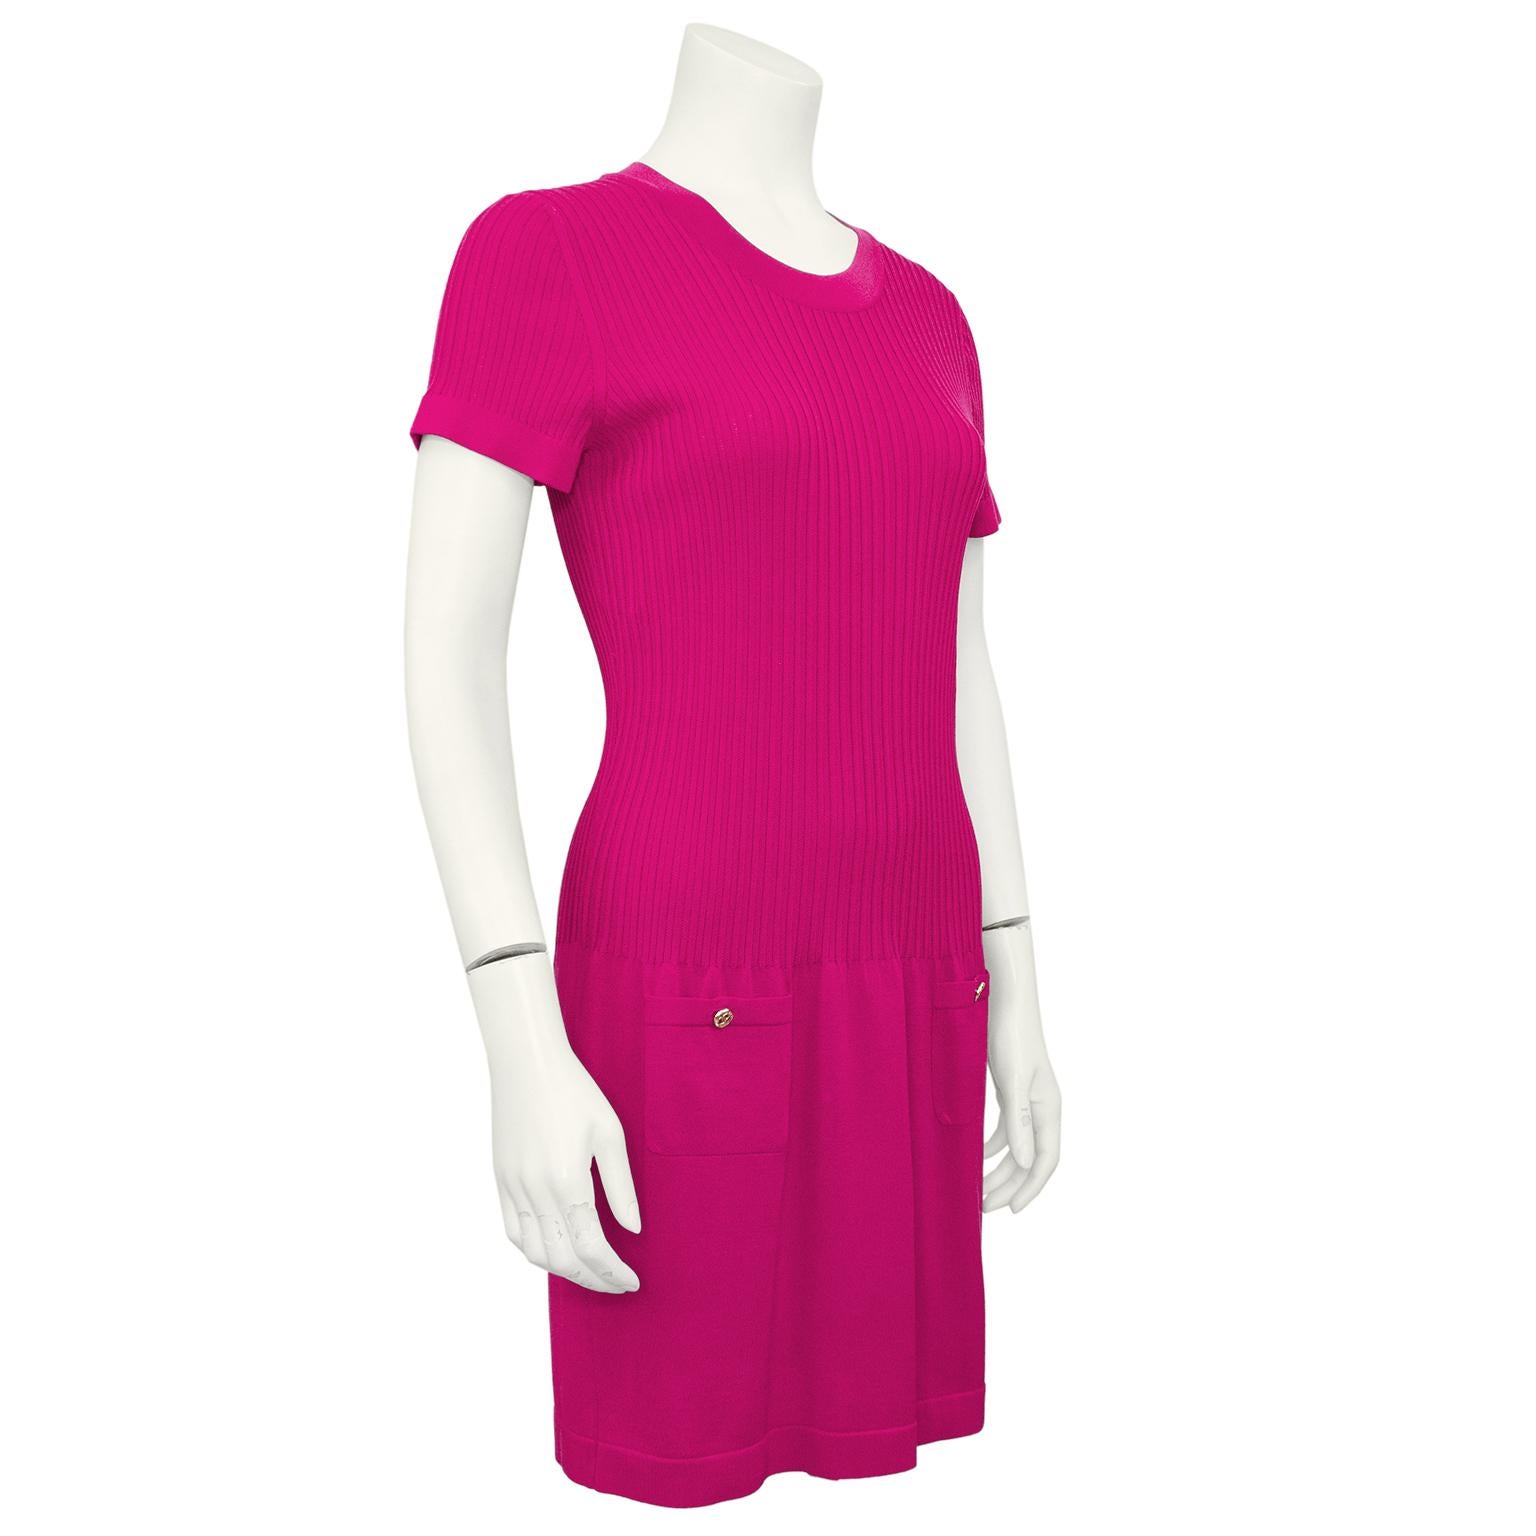 Chanel resort 2011 dark magenta short sleeve dress. Crew neckline with ribbed sleeves and bodice. Body con to the drop waist with a very slightly flared short skirt. Pockets at hips with gold tone interlocking cc logo buttons. Lightweight 57% cotton